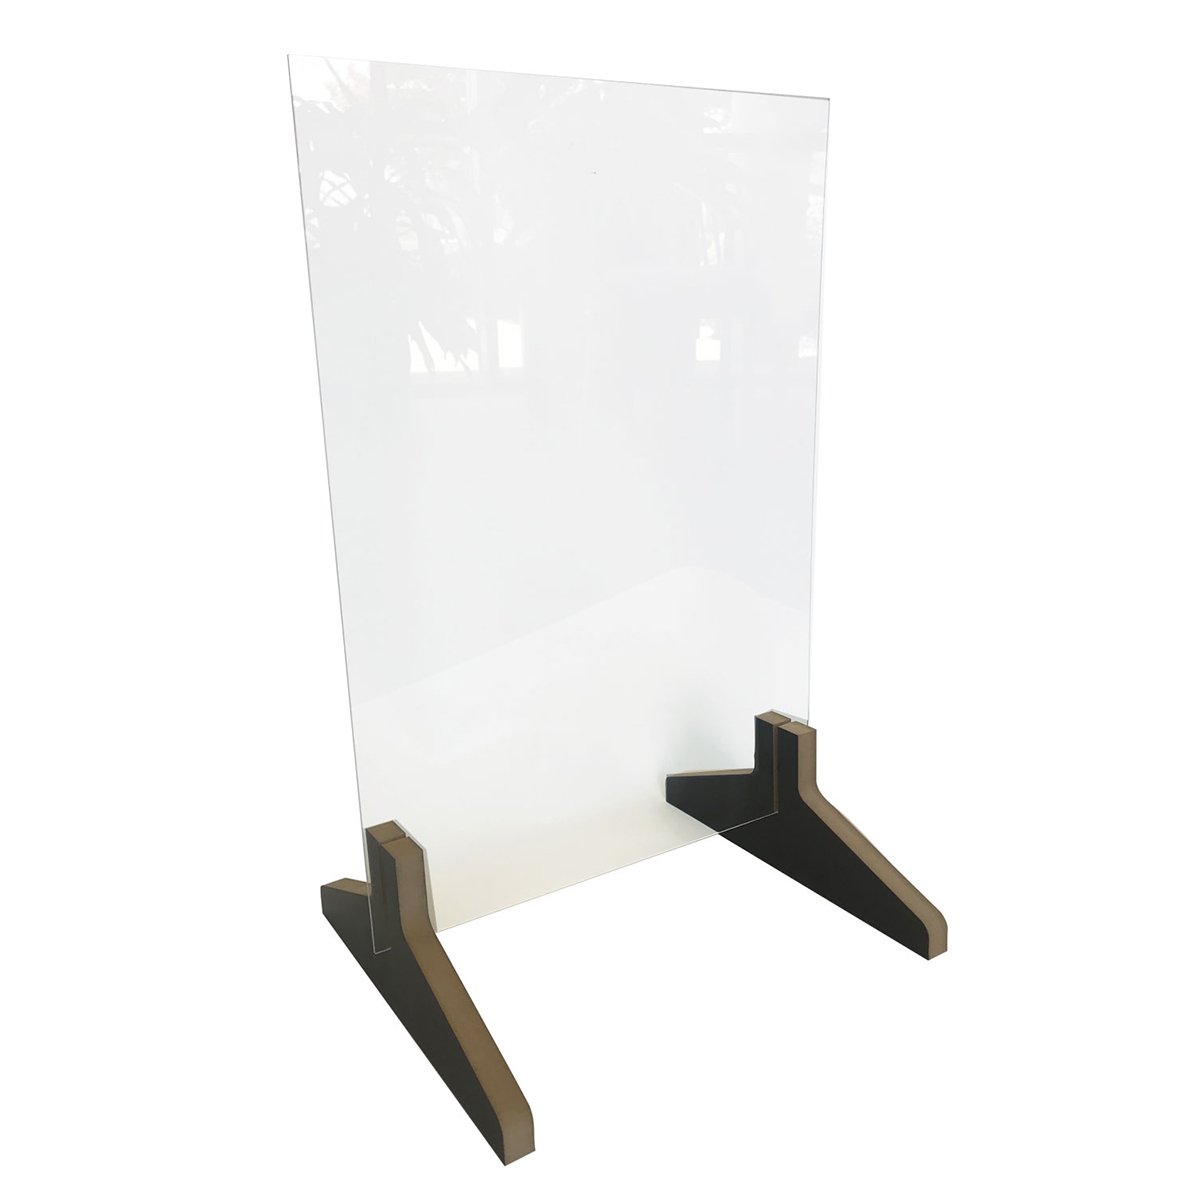 Waddell Countertop Protective Plastic Shield No Frame 2-piece Wood Base 23H x 15W x 12D 2-PACK